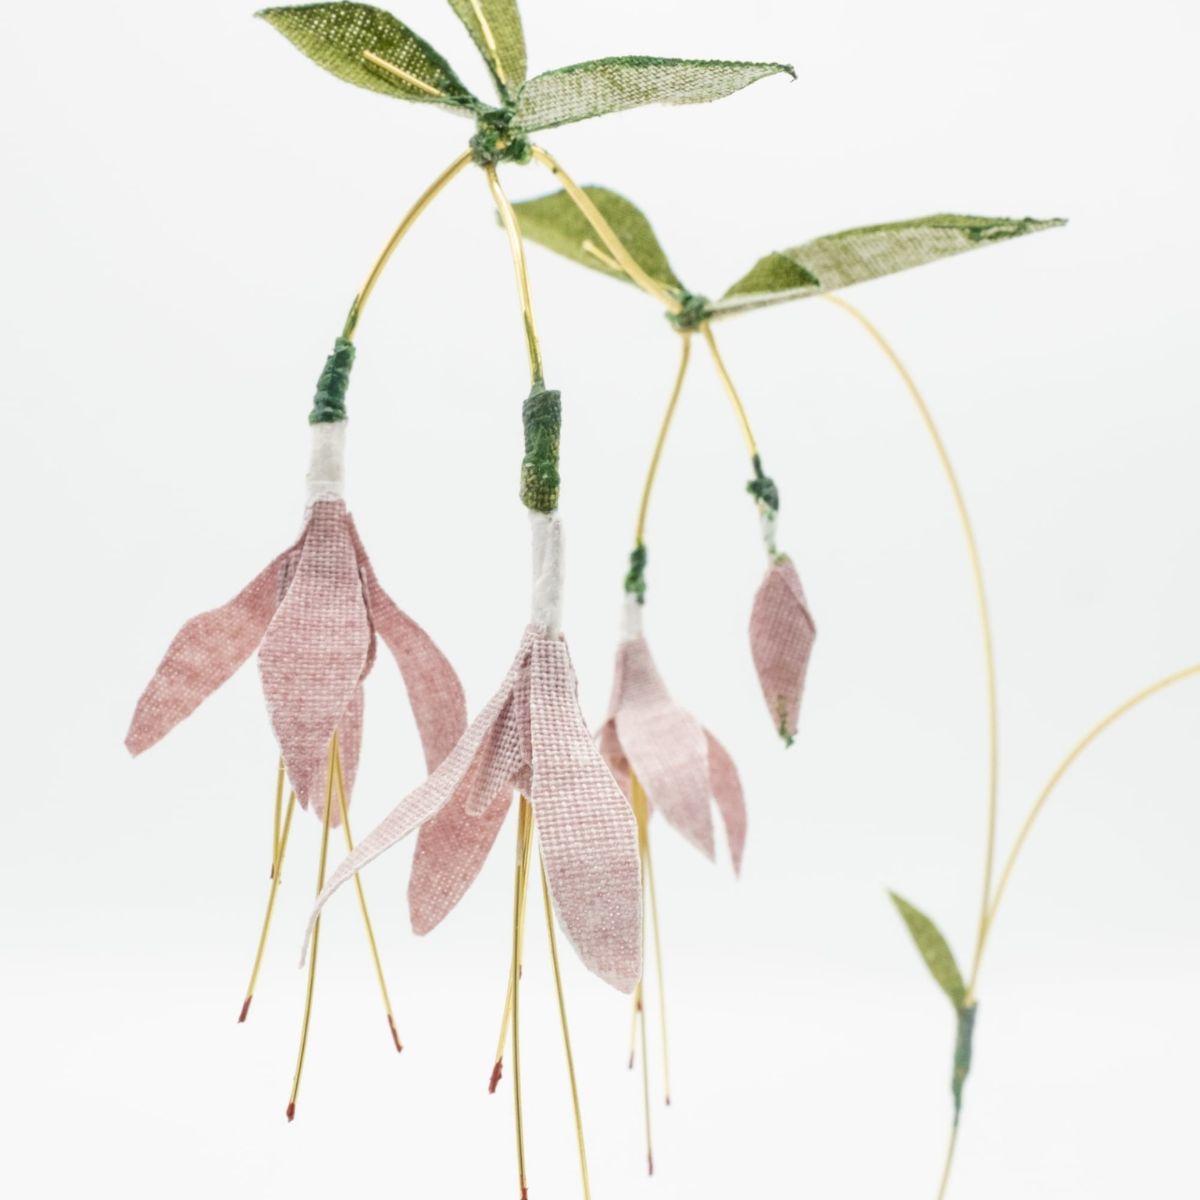 Flowers made from wire and textile by Lauren Pruen featured on Thursd